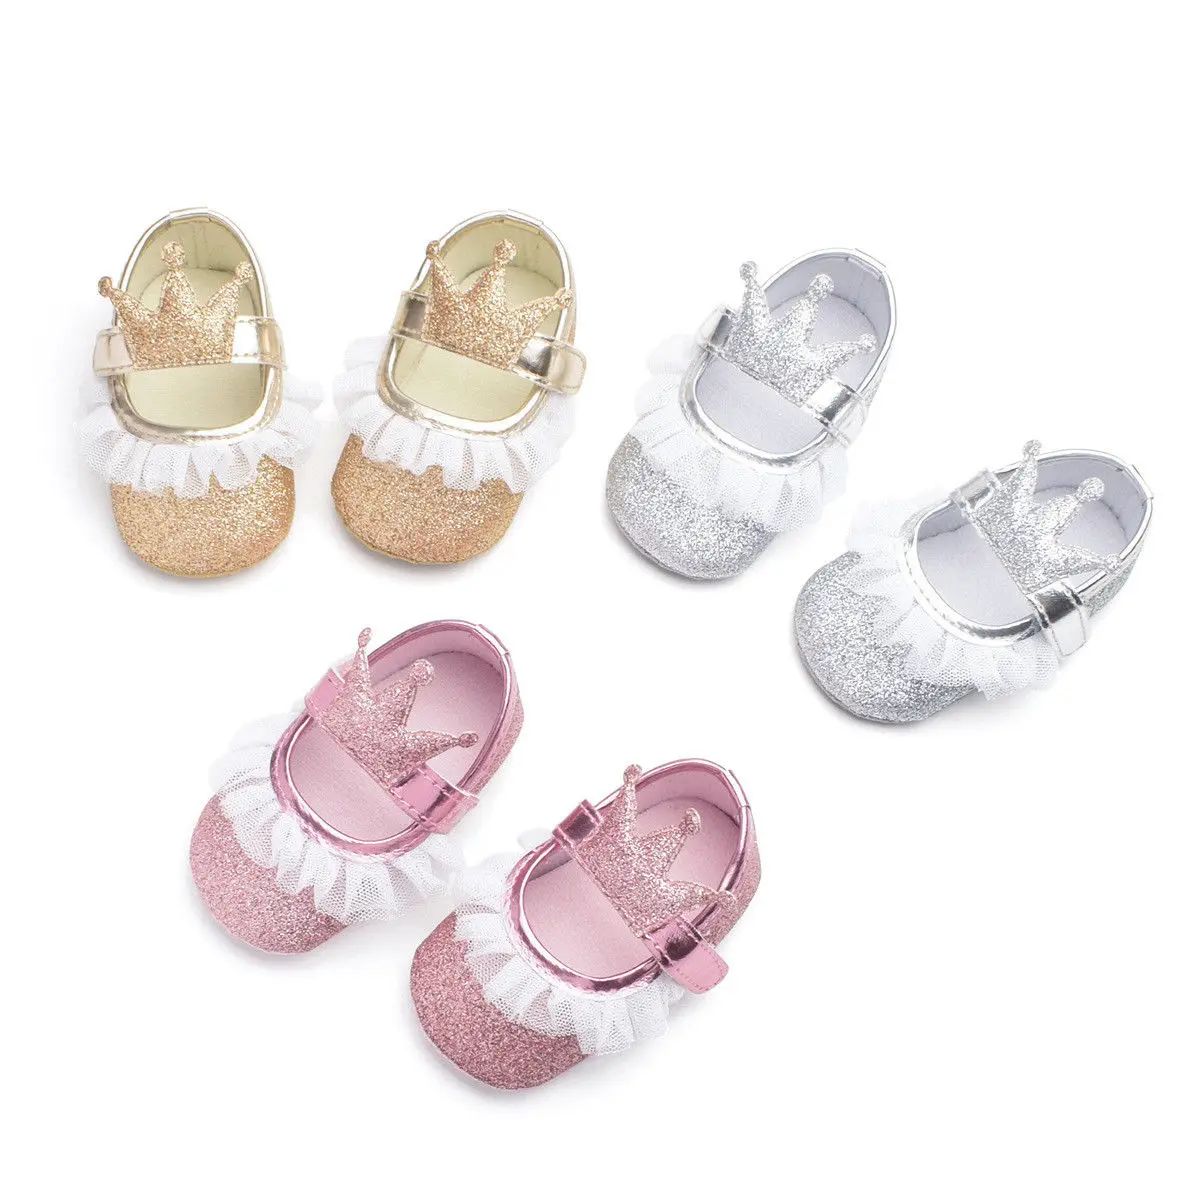 Princess Sandals,Baby Girls Kids Sparkly Princess Sandals Soft Sole First Walker Crib Shoes Princess Casual Shoes